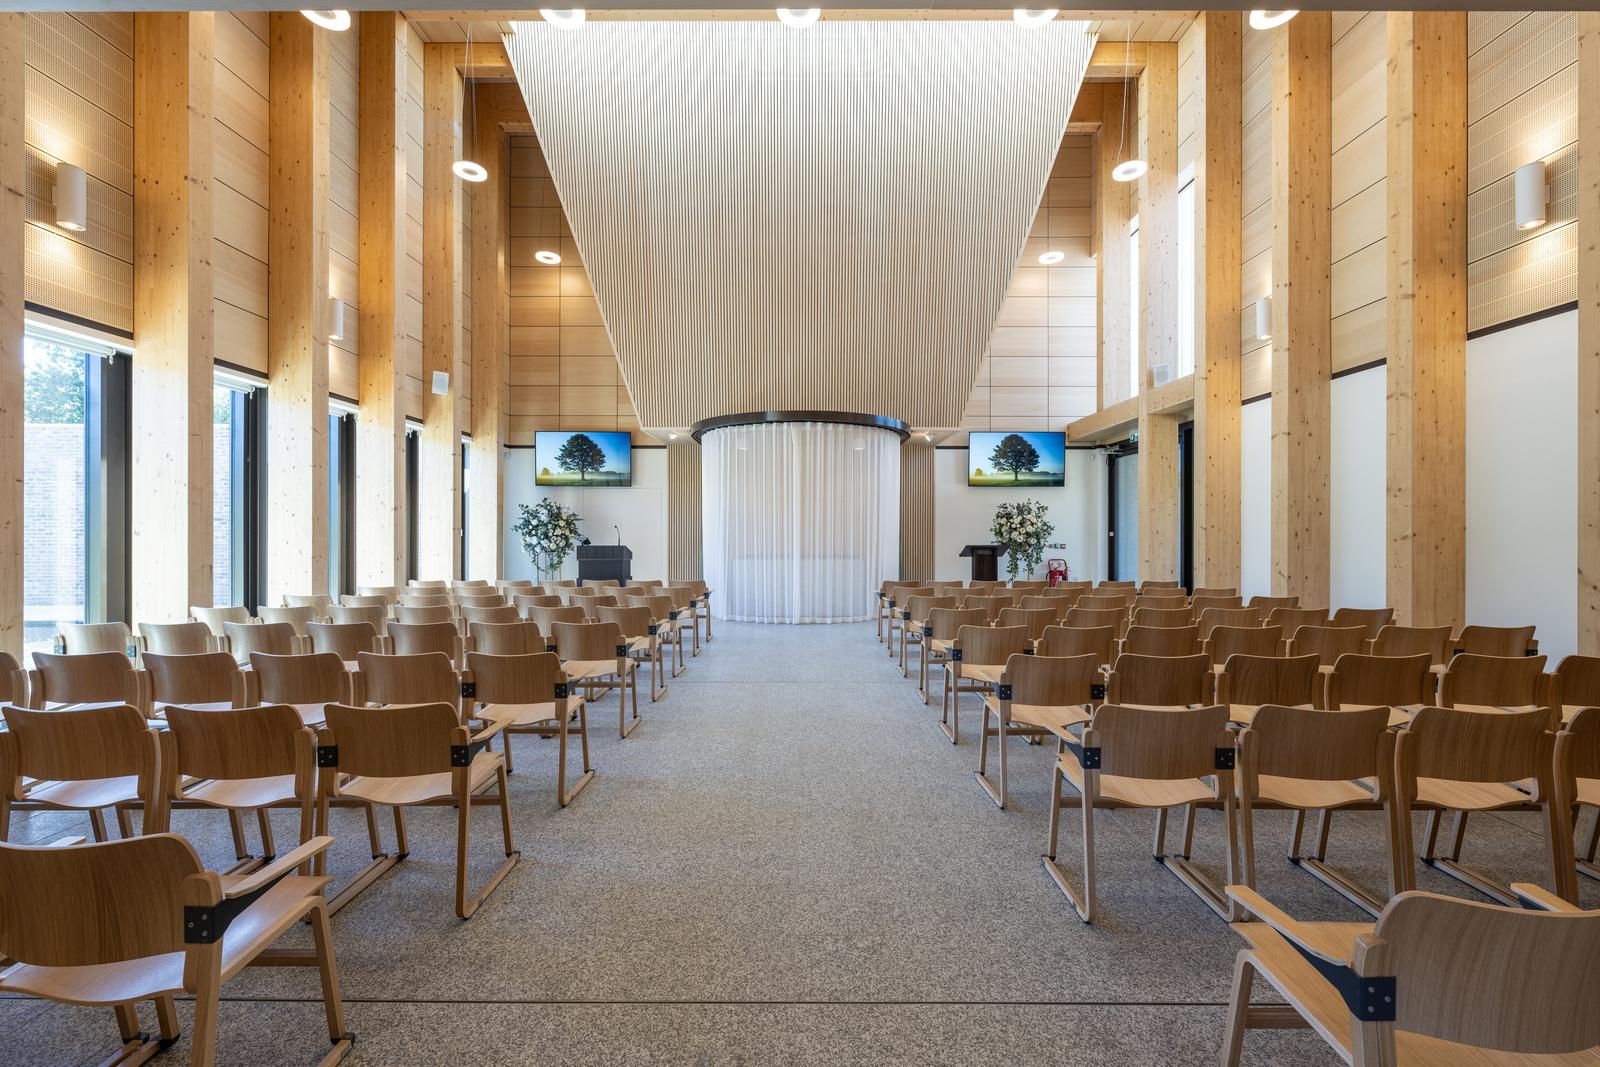 Inside of the chapel where there are wooden chairs and white curtains around a coffin